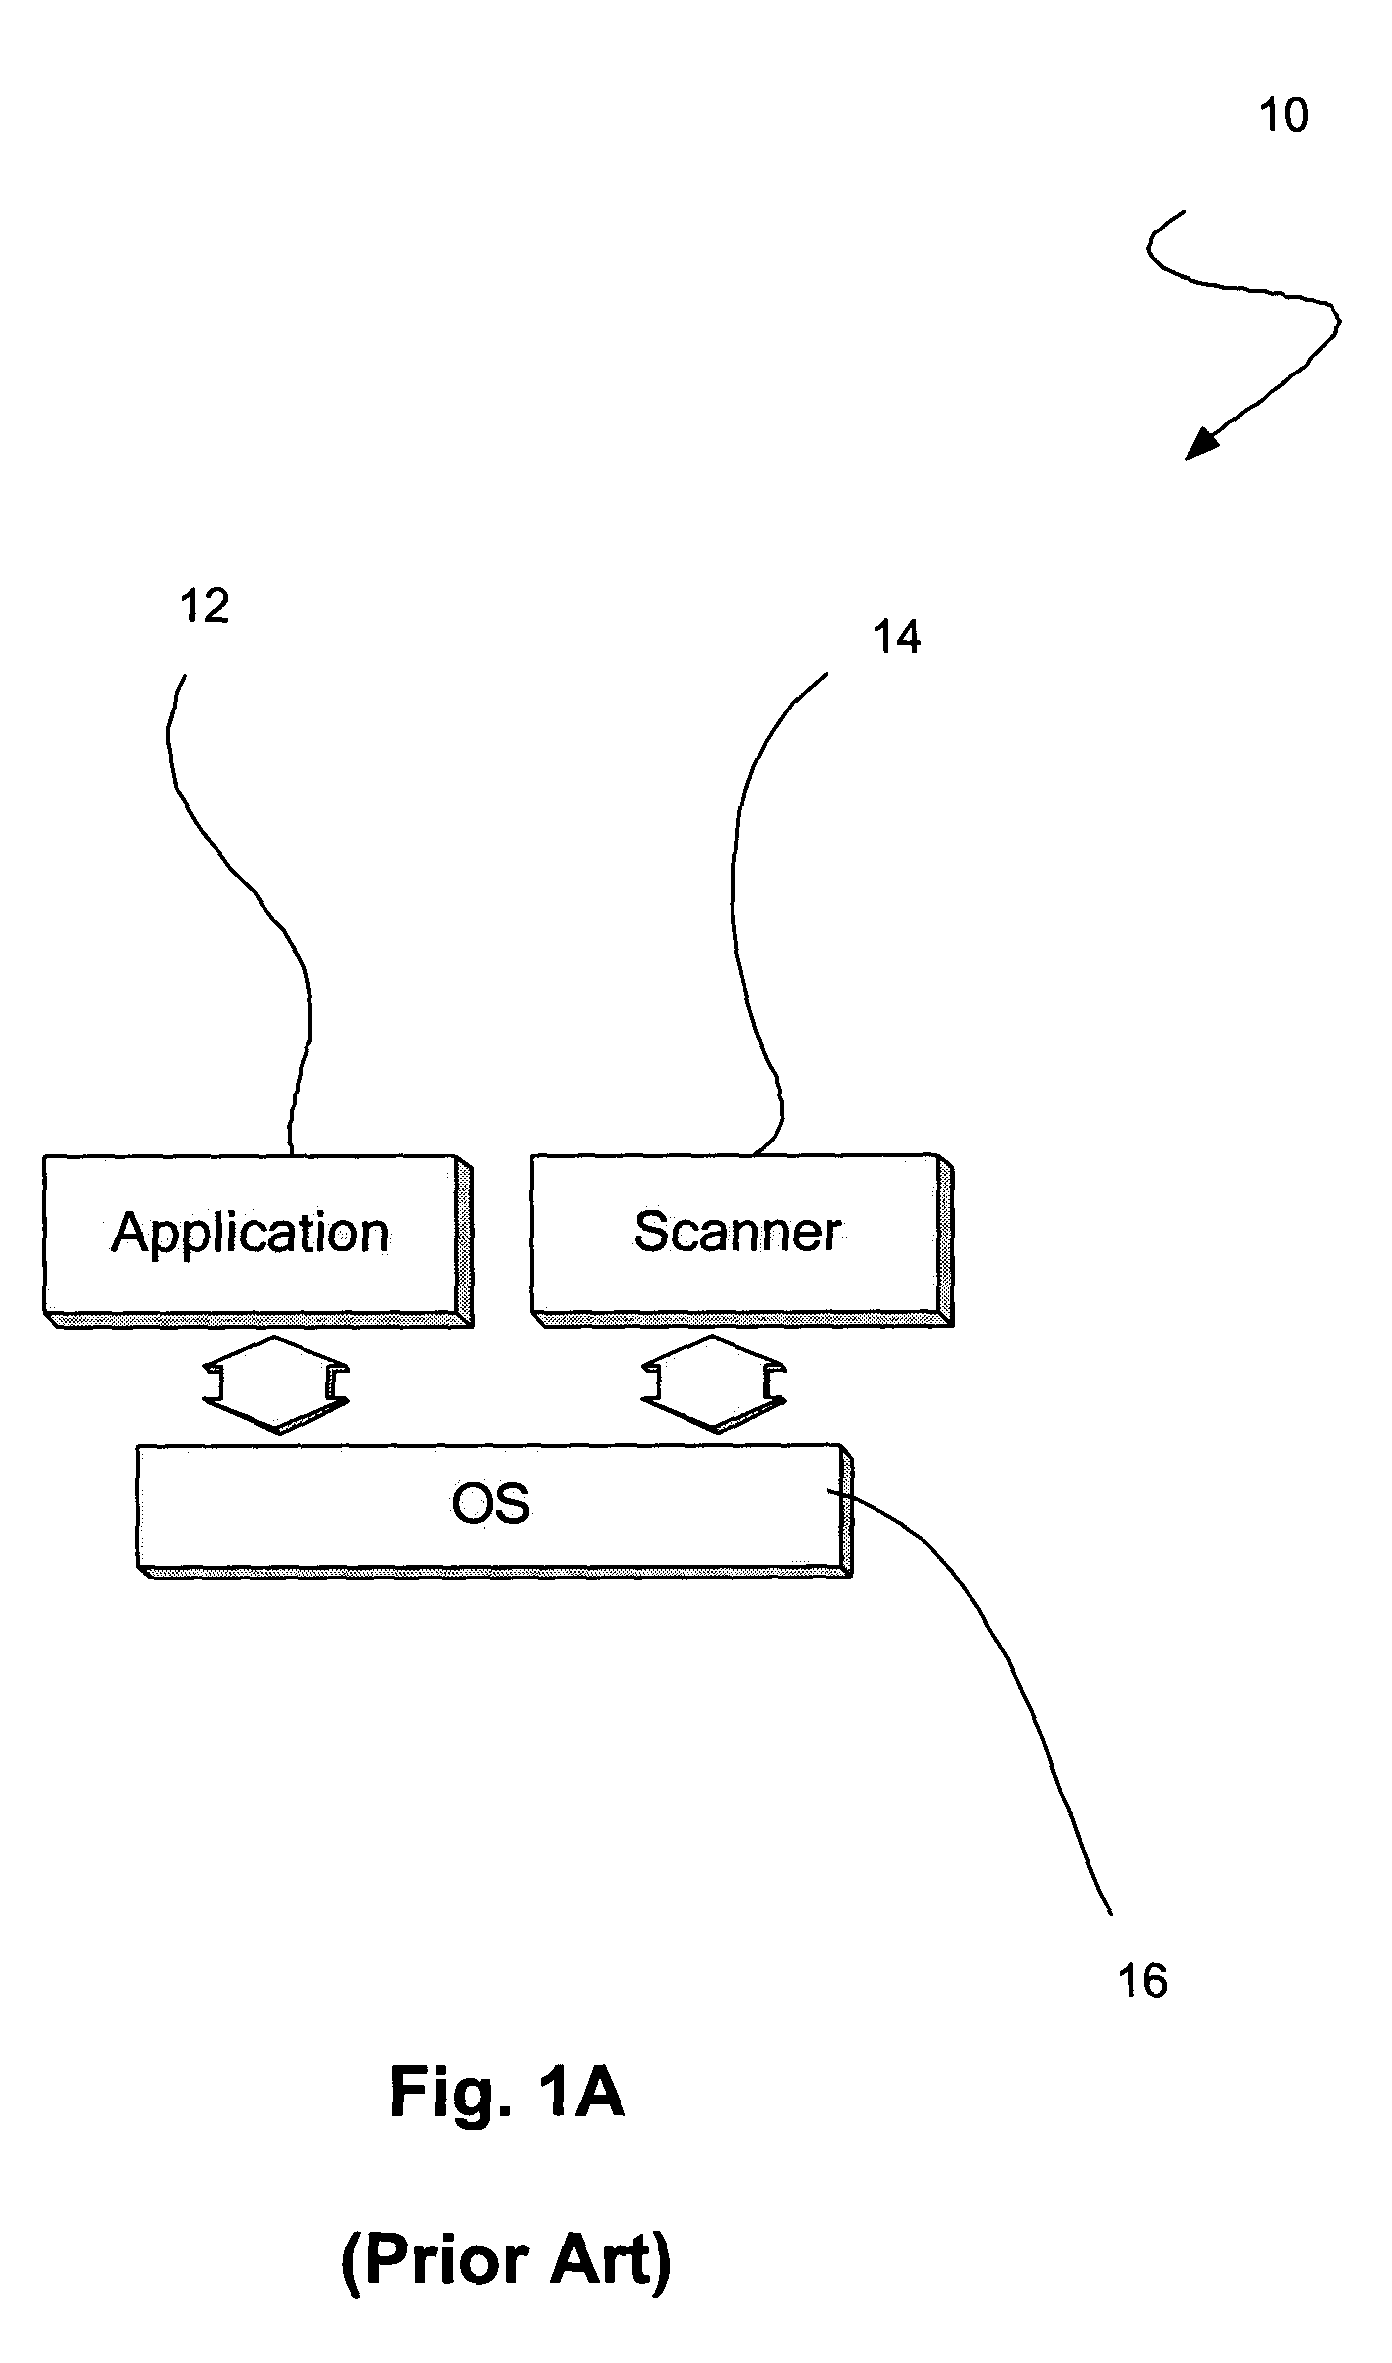 API system, method and computer program product for accessing content/security analysis functionality in a mobile communication framework